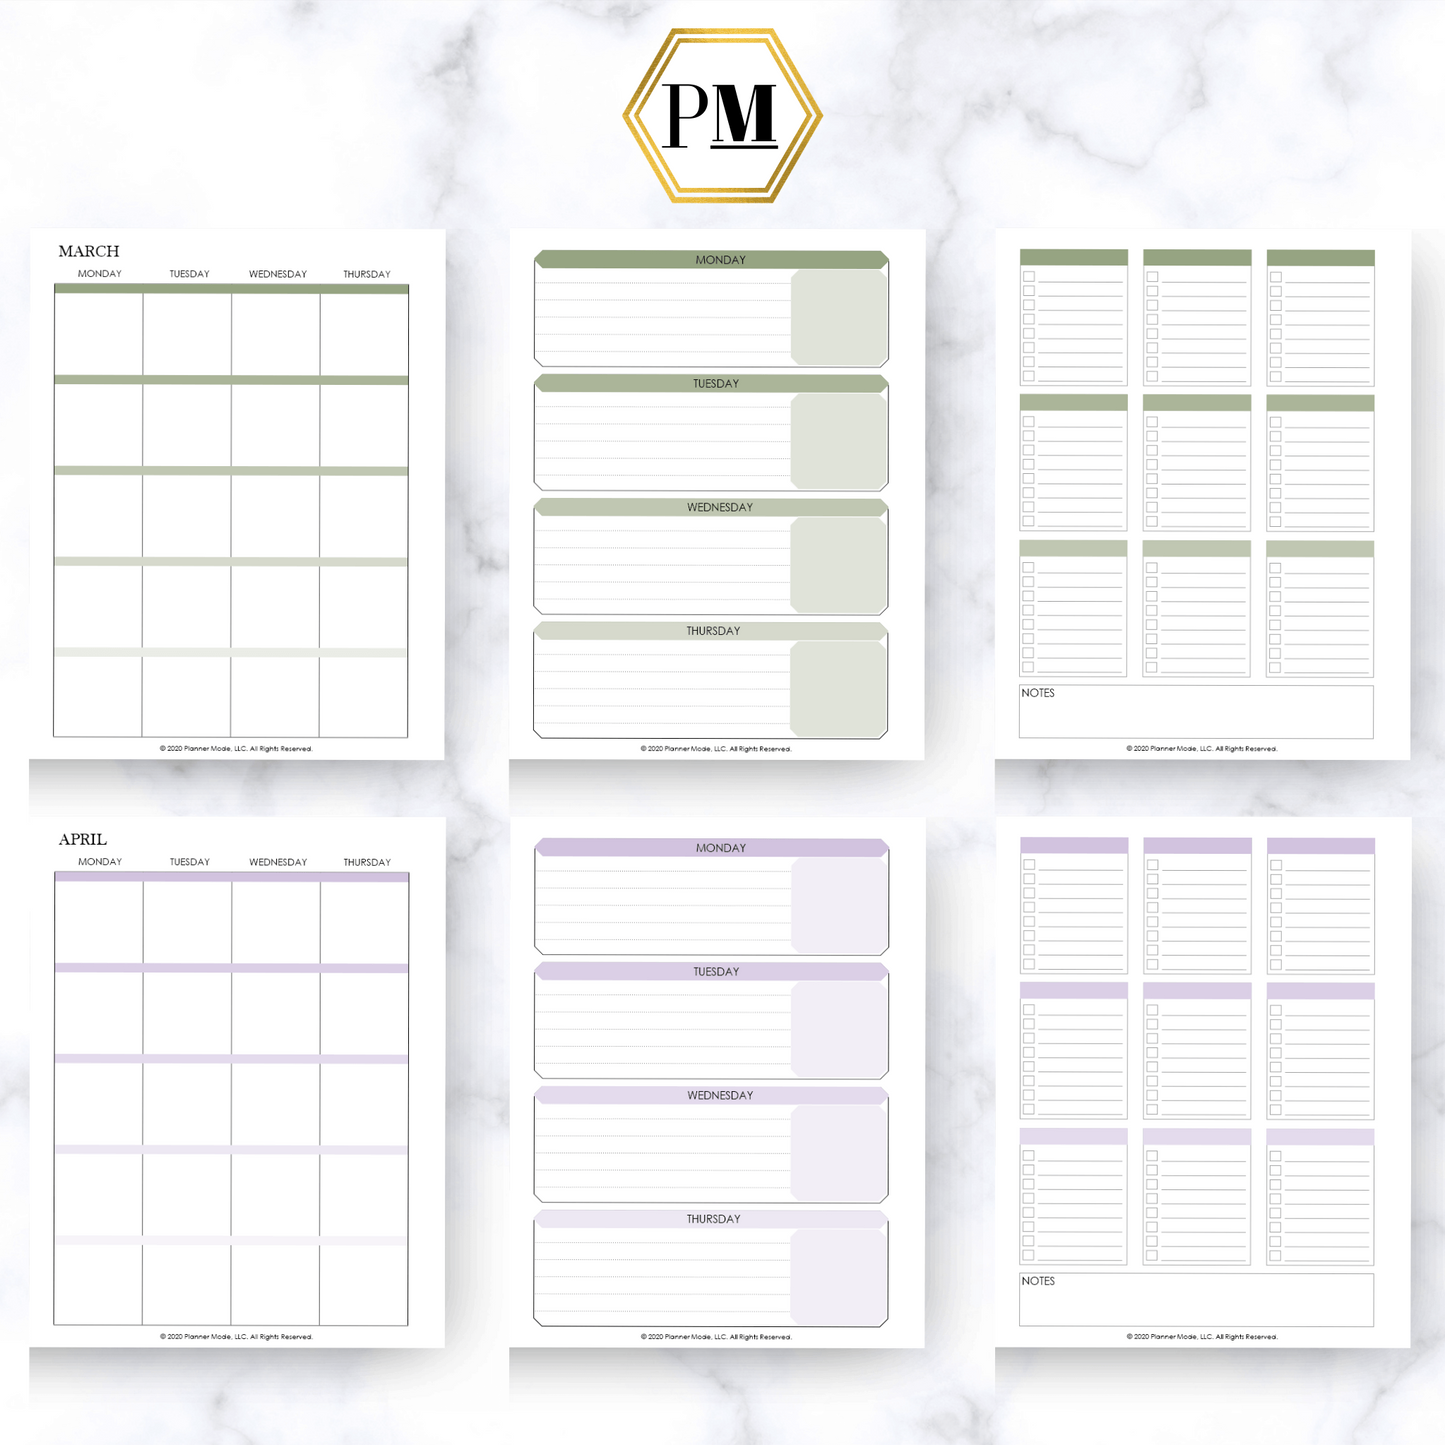 Pink Signature Lifestyle Mode Planner